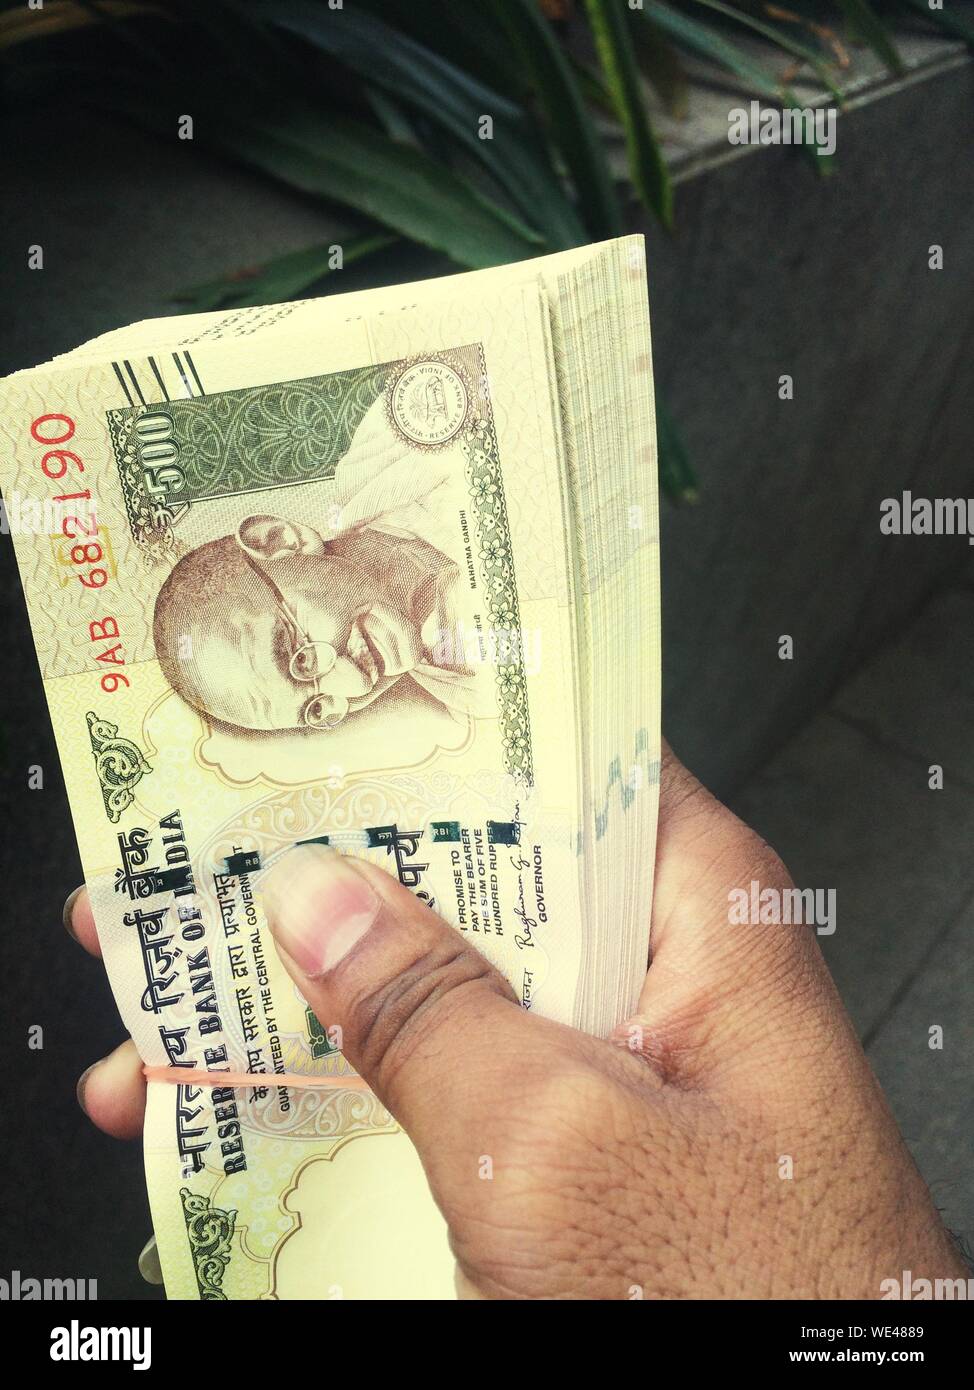 Close-up Of Human Hand Holding Paper Money Stock Photo